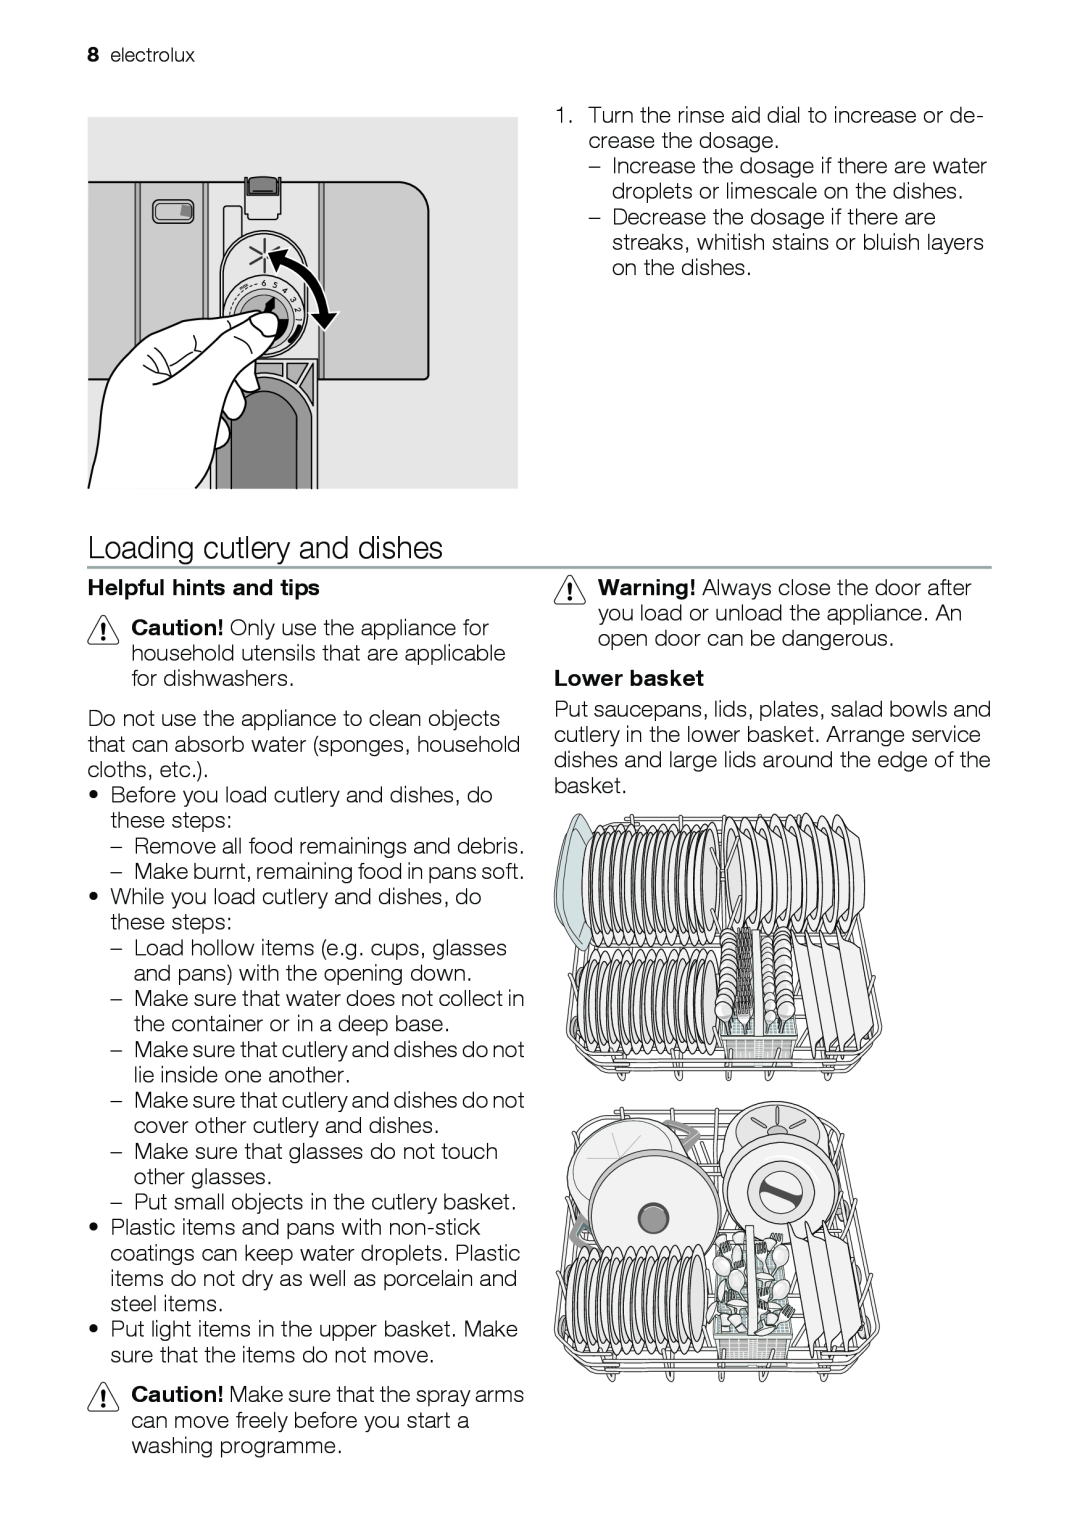 Epson ESL63010 user manual Loading cutlery and dishes, Helpful hints and tips, Lower basket 